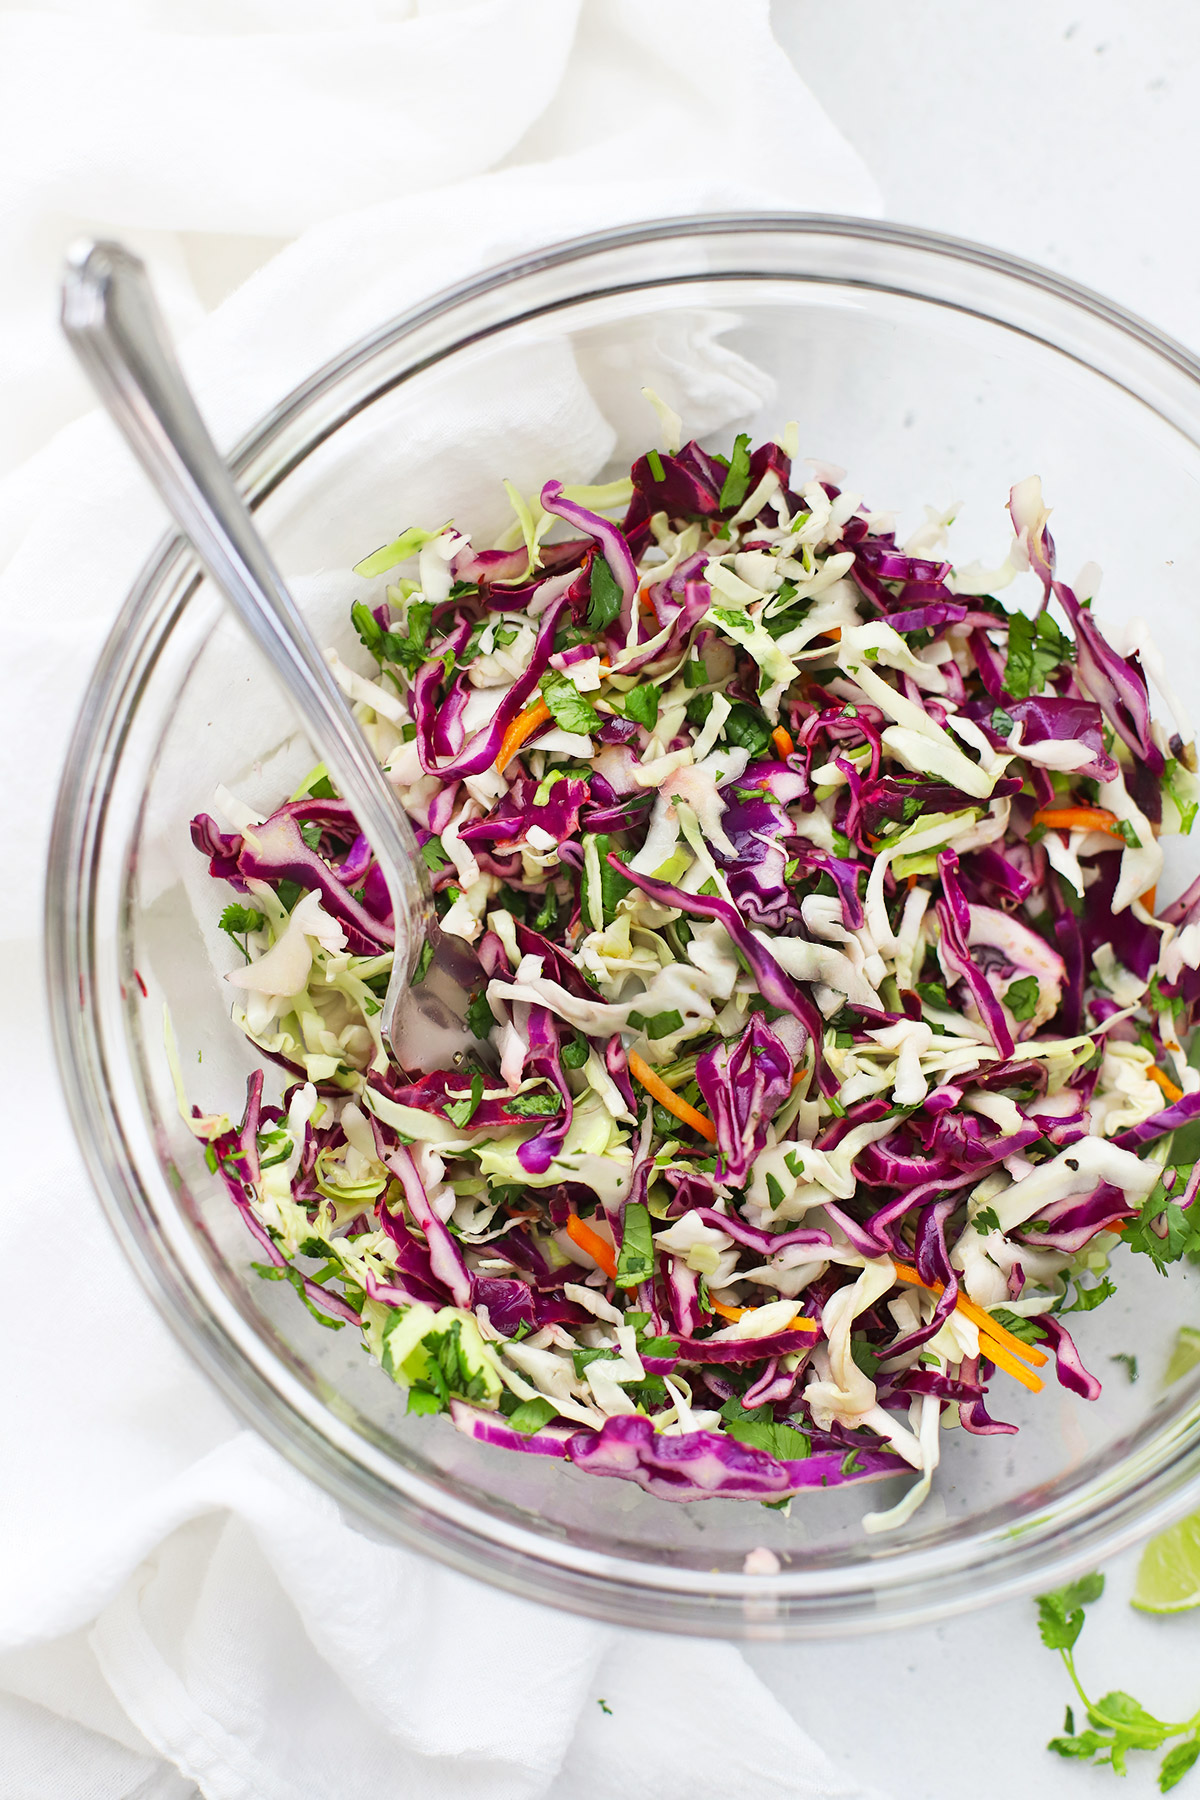 Cilantro Lime Slaw for Tacos and More!